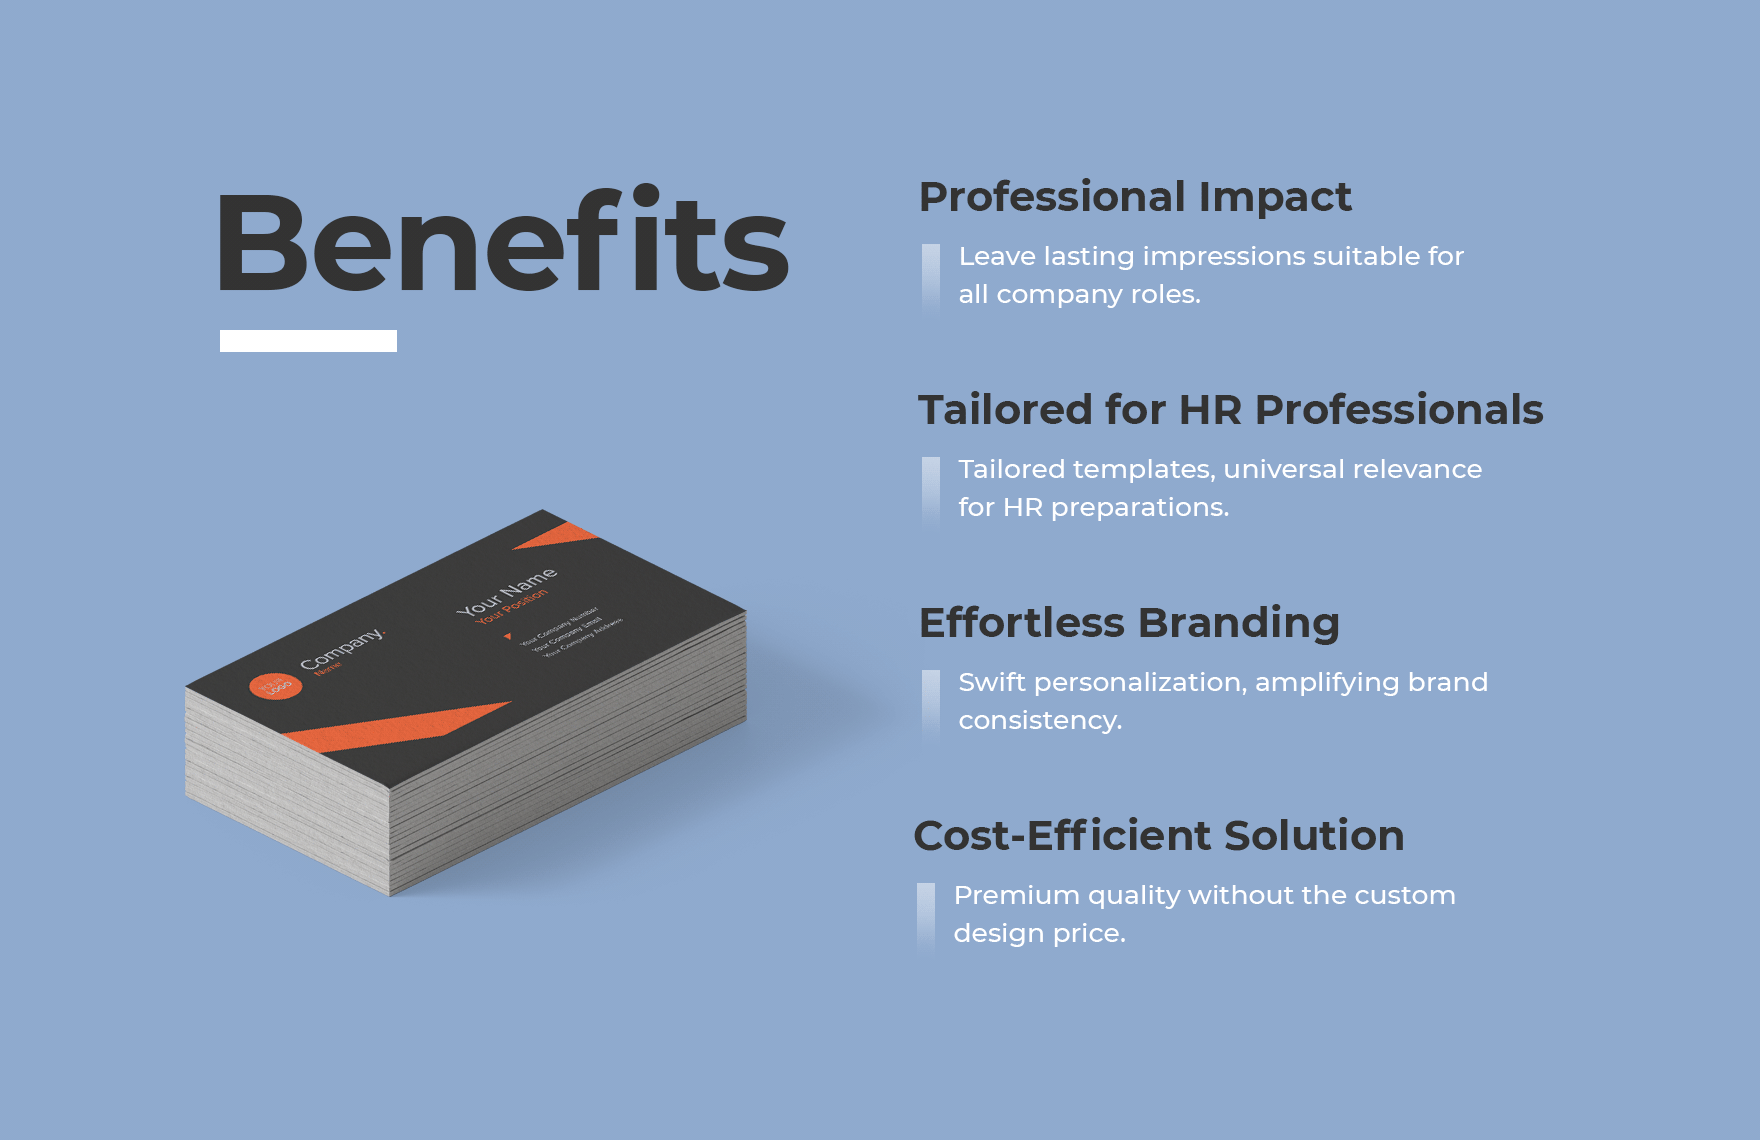 Purchasing Manager Business Card Template